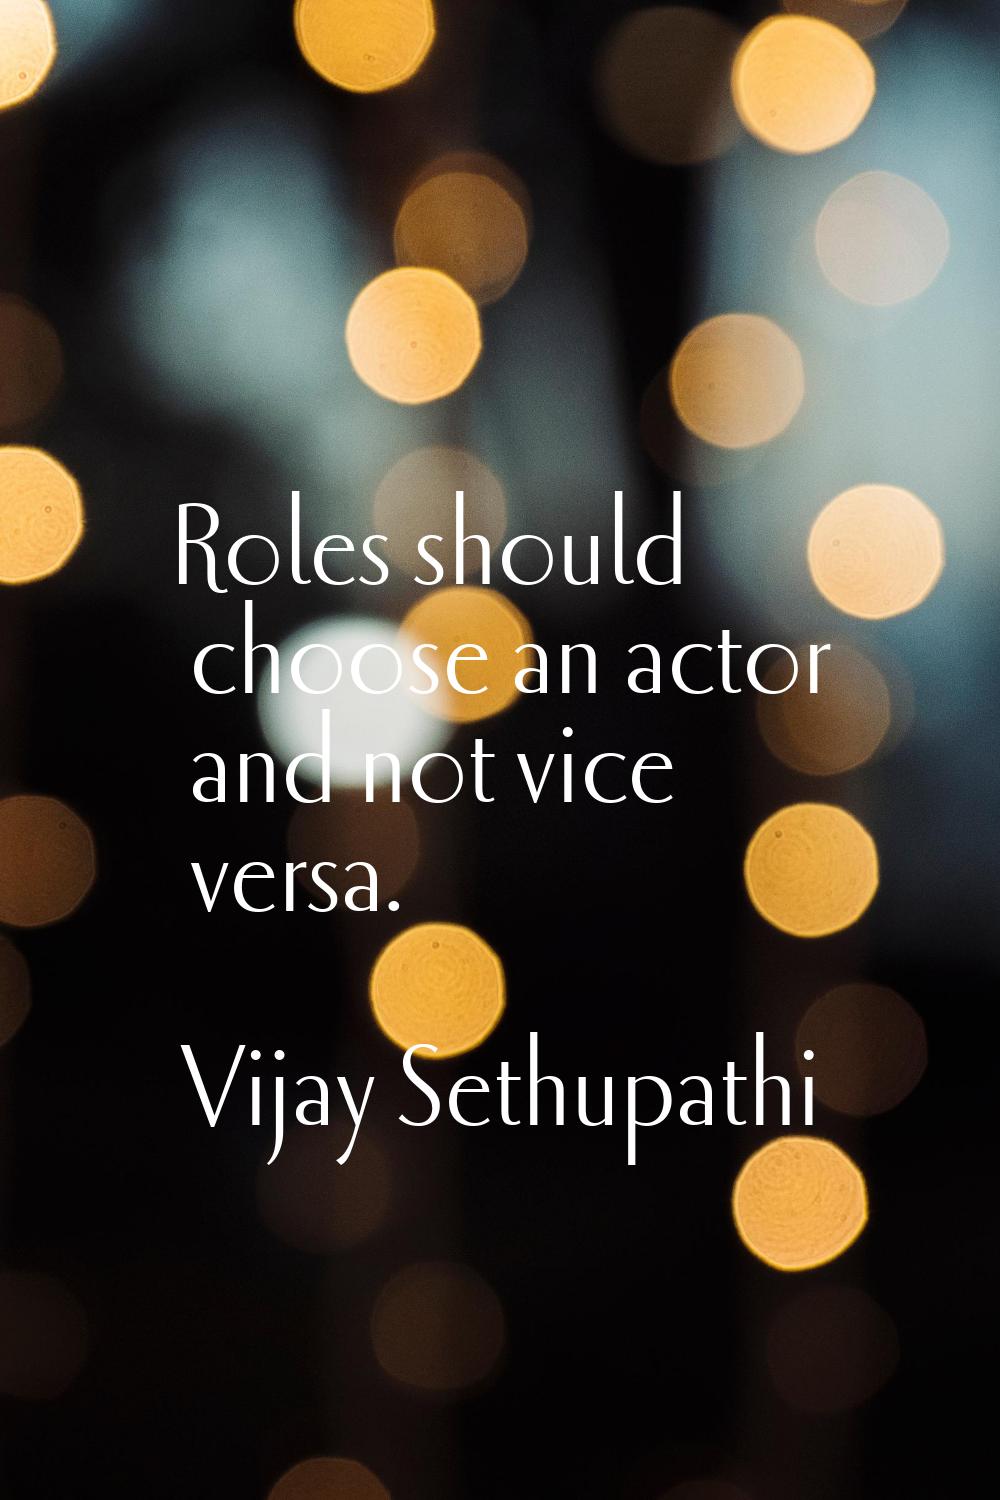 Roles should choose an actor and not vice versa.